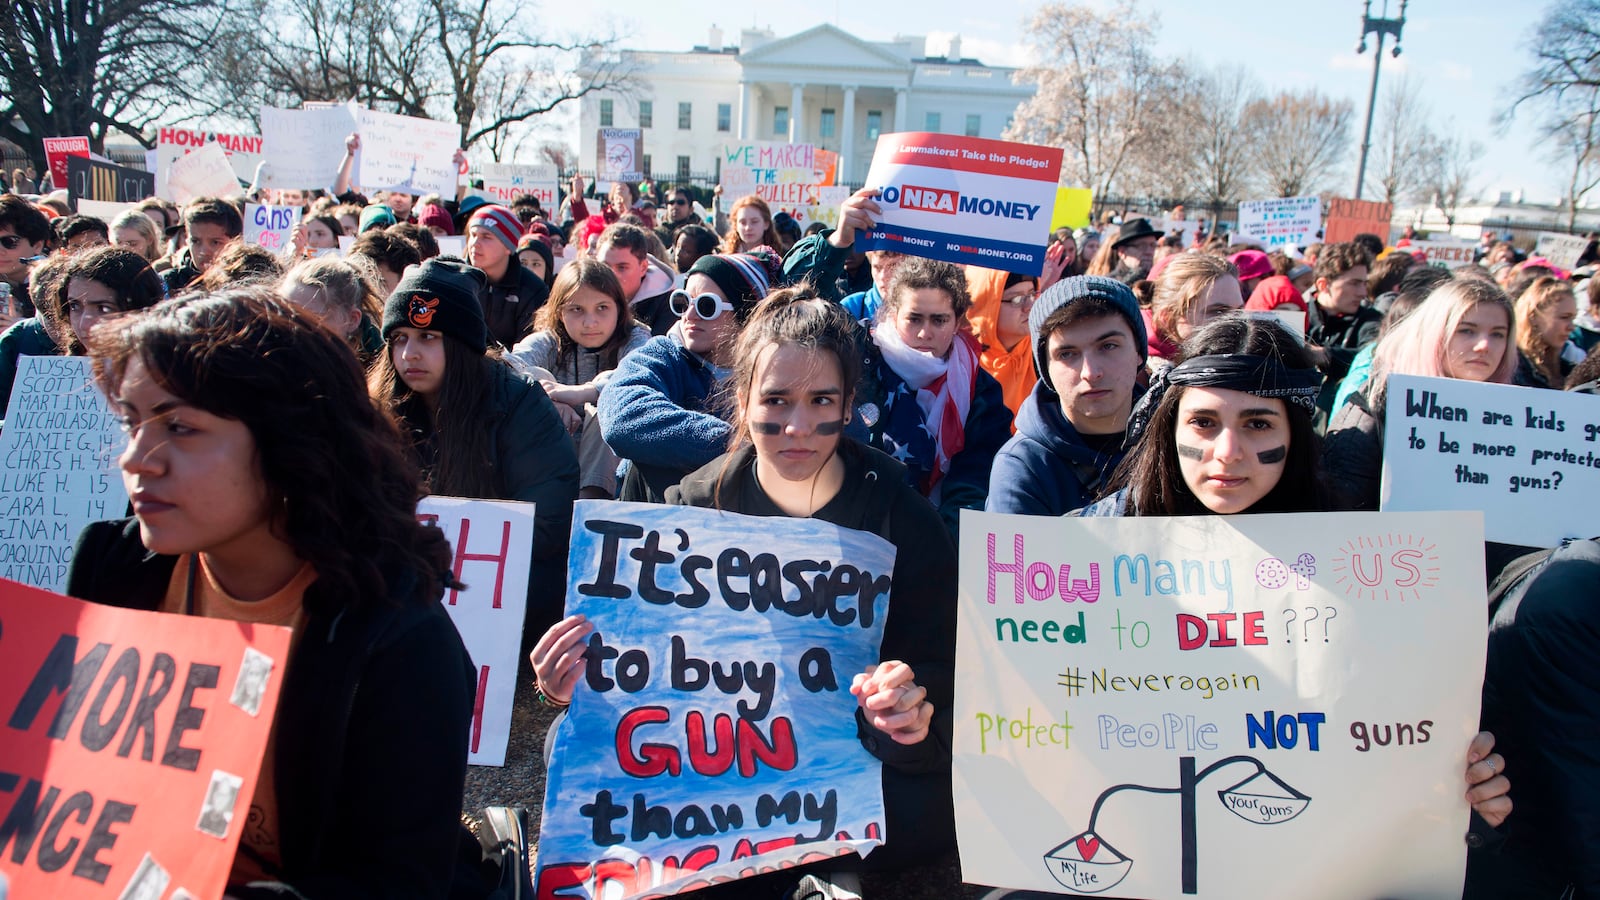 Thousands of local students sit for 17 minutes during a nationwide student walkout for gun control in front the White House on March 14, 2018. (SAUL LOEB/AFP/Getty Images)